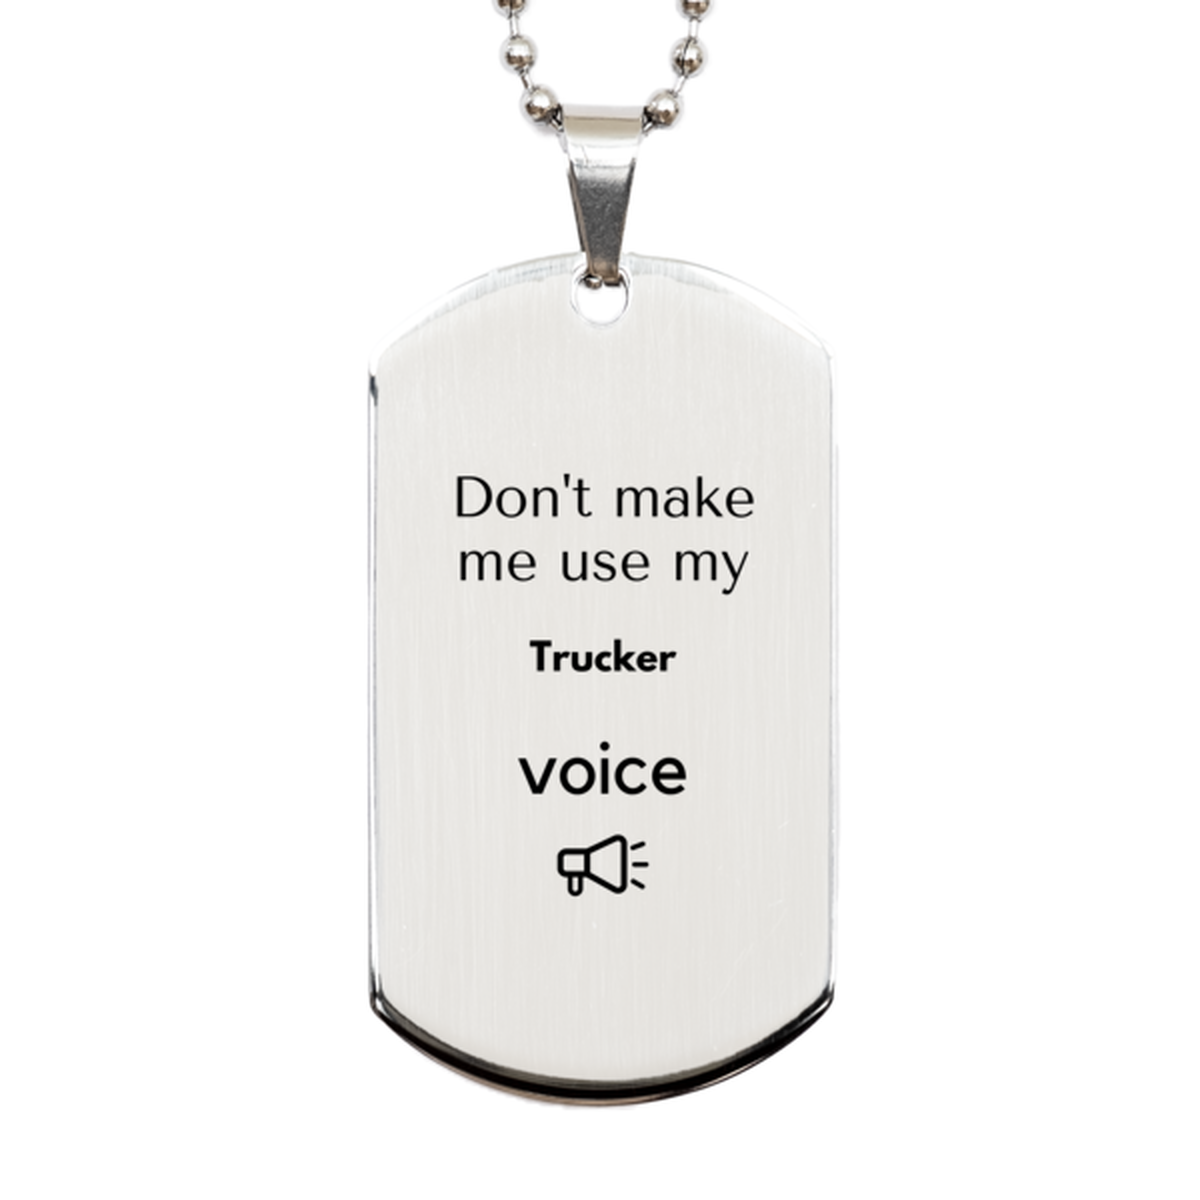 Don't make me use my Trucker voice, Sarcasm Trucker Gifts, Christmas Trucker Silver Dog Tag Birthday Unique Gifts For Trucker Coworkers, Men, Women, Colleague, Friends